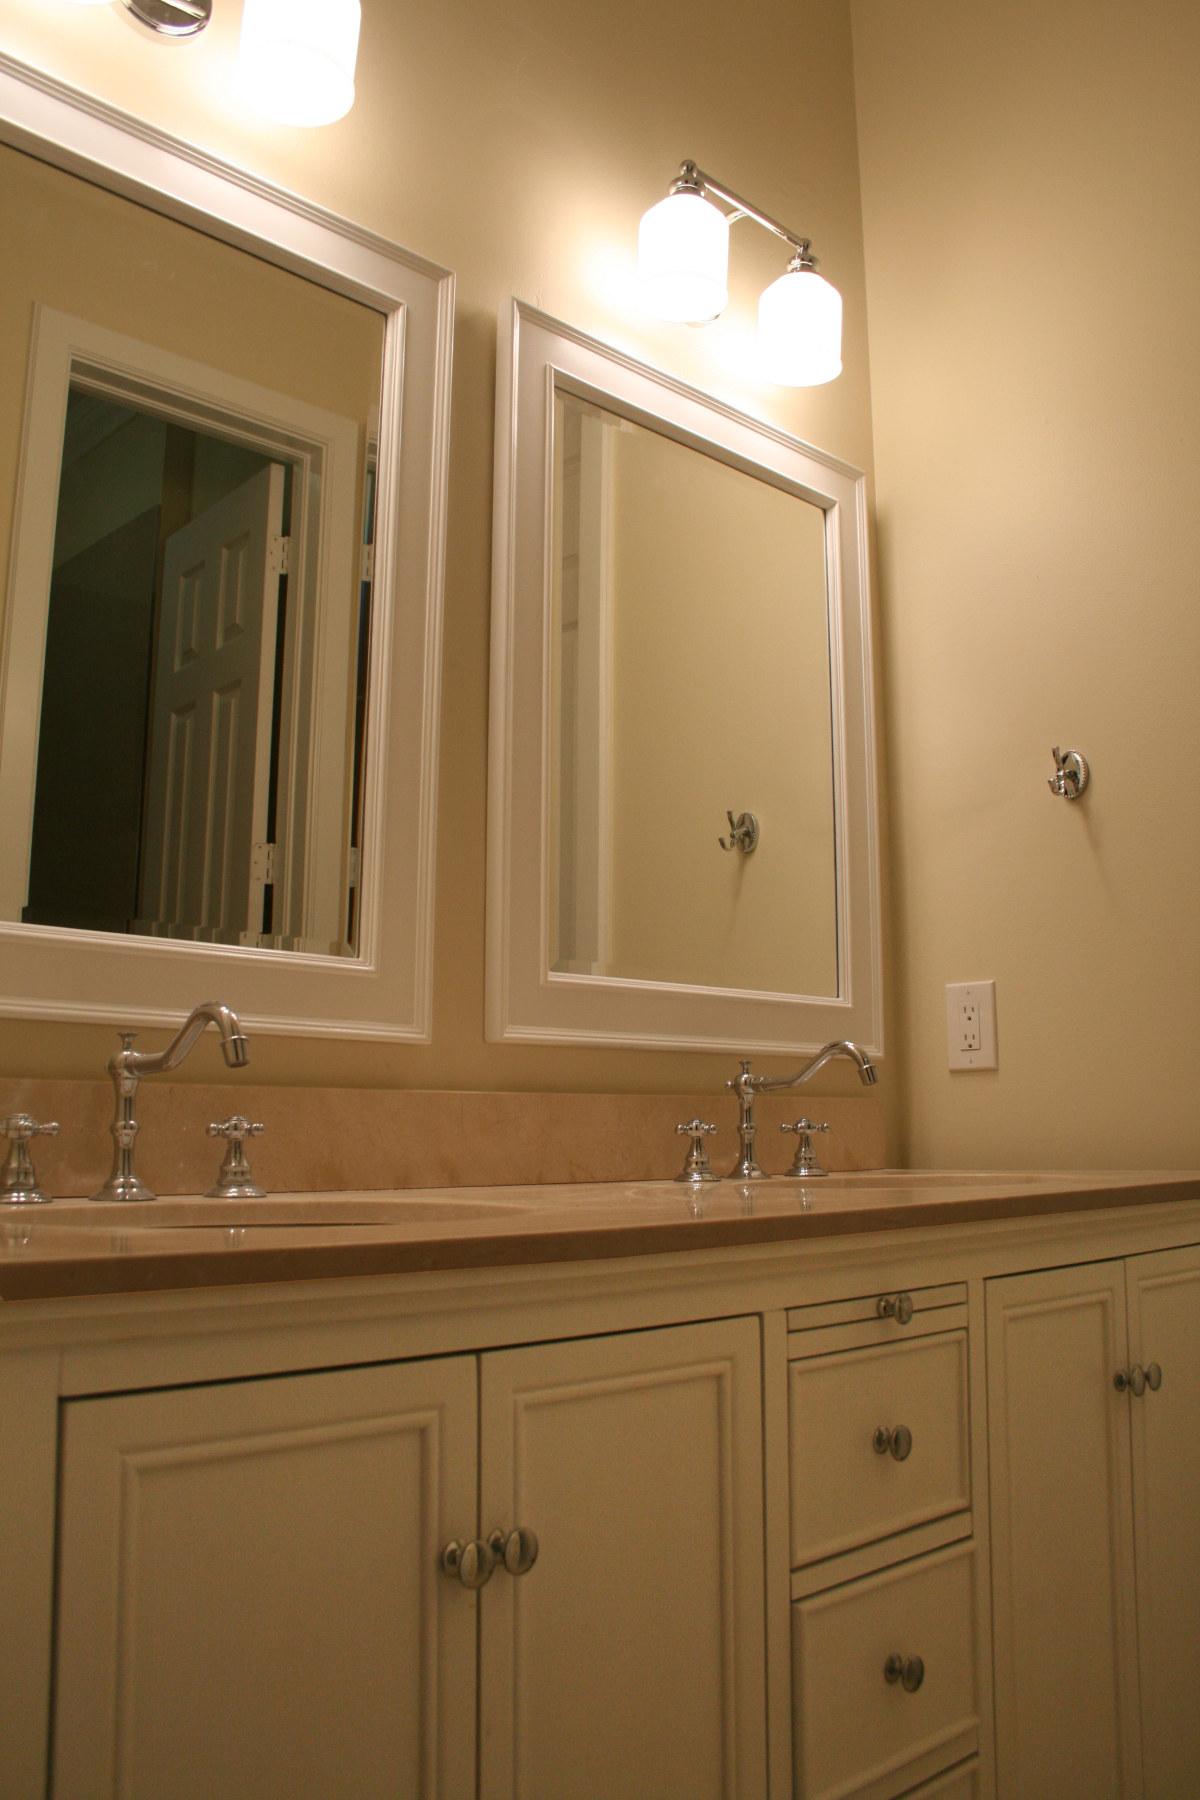 New Vanity after interior remodel with new faucets, quartz counter top, mirrors and lights